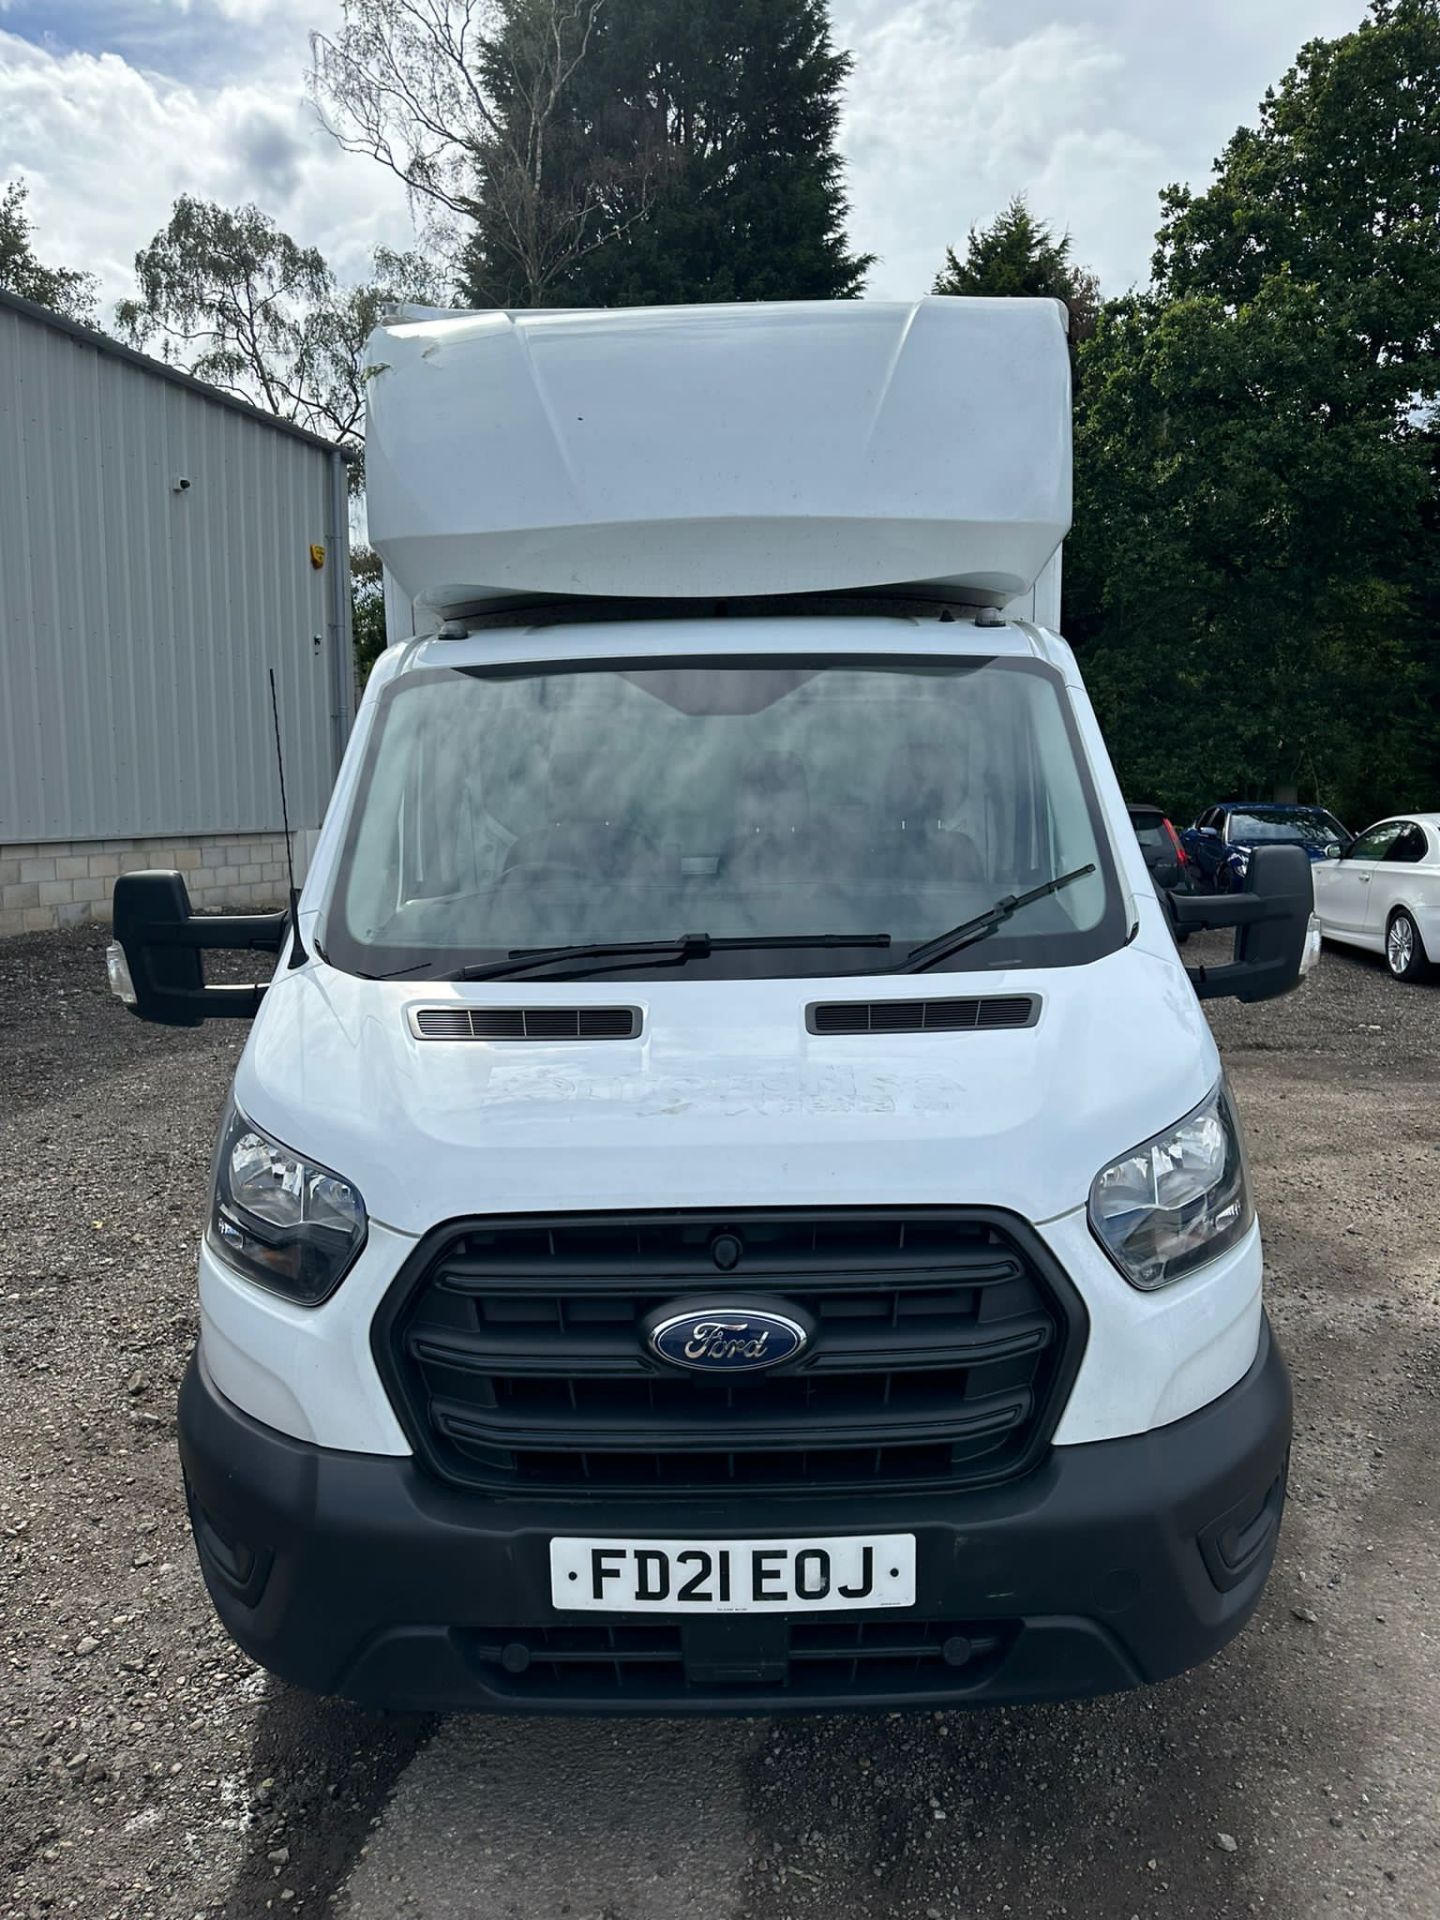 2021 21 ford Transit Luton - 47k miles - Lwb - Ideal recovery truck conversion - Image 2 of 8